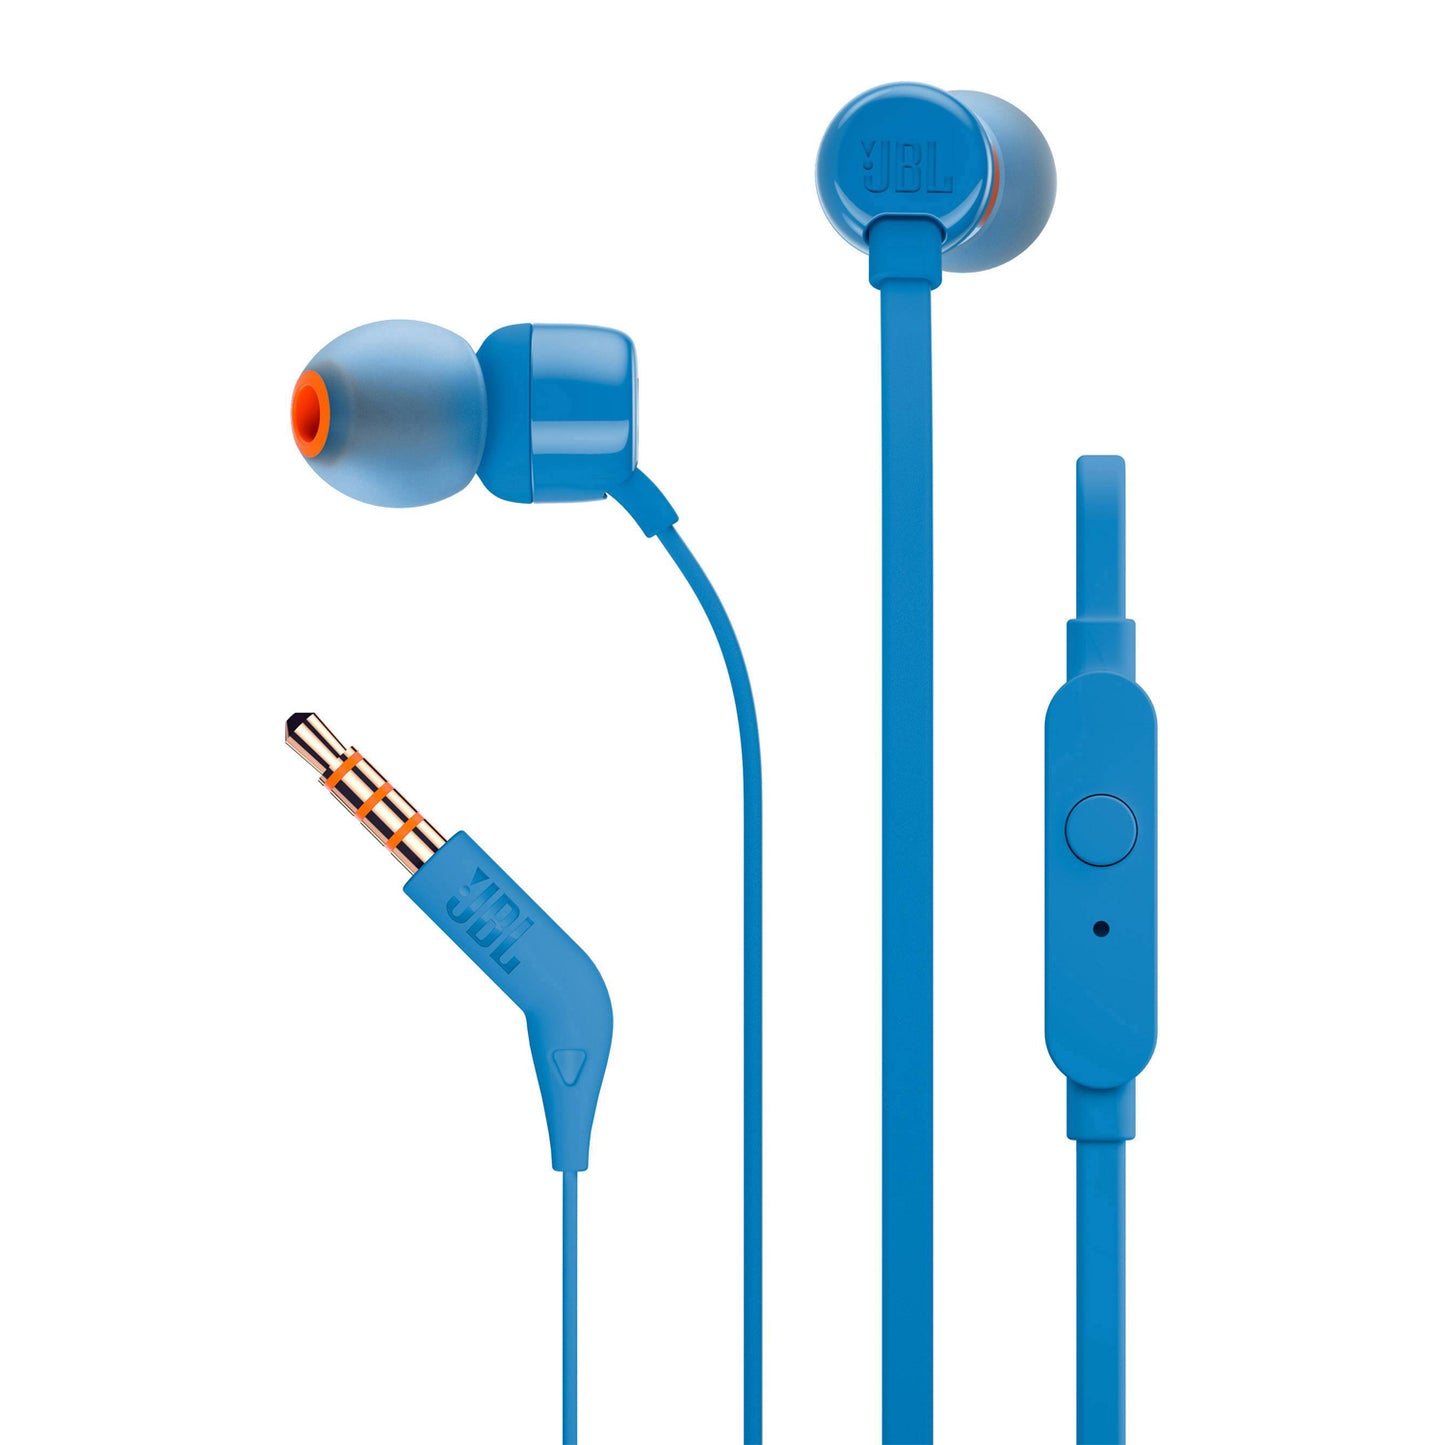 JBL T110 In Ear Headphones with Microphone, Tangle-Free Flat Cable, One-Button Control, JBL Pure Bass Sound, Blue